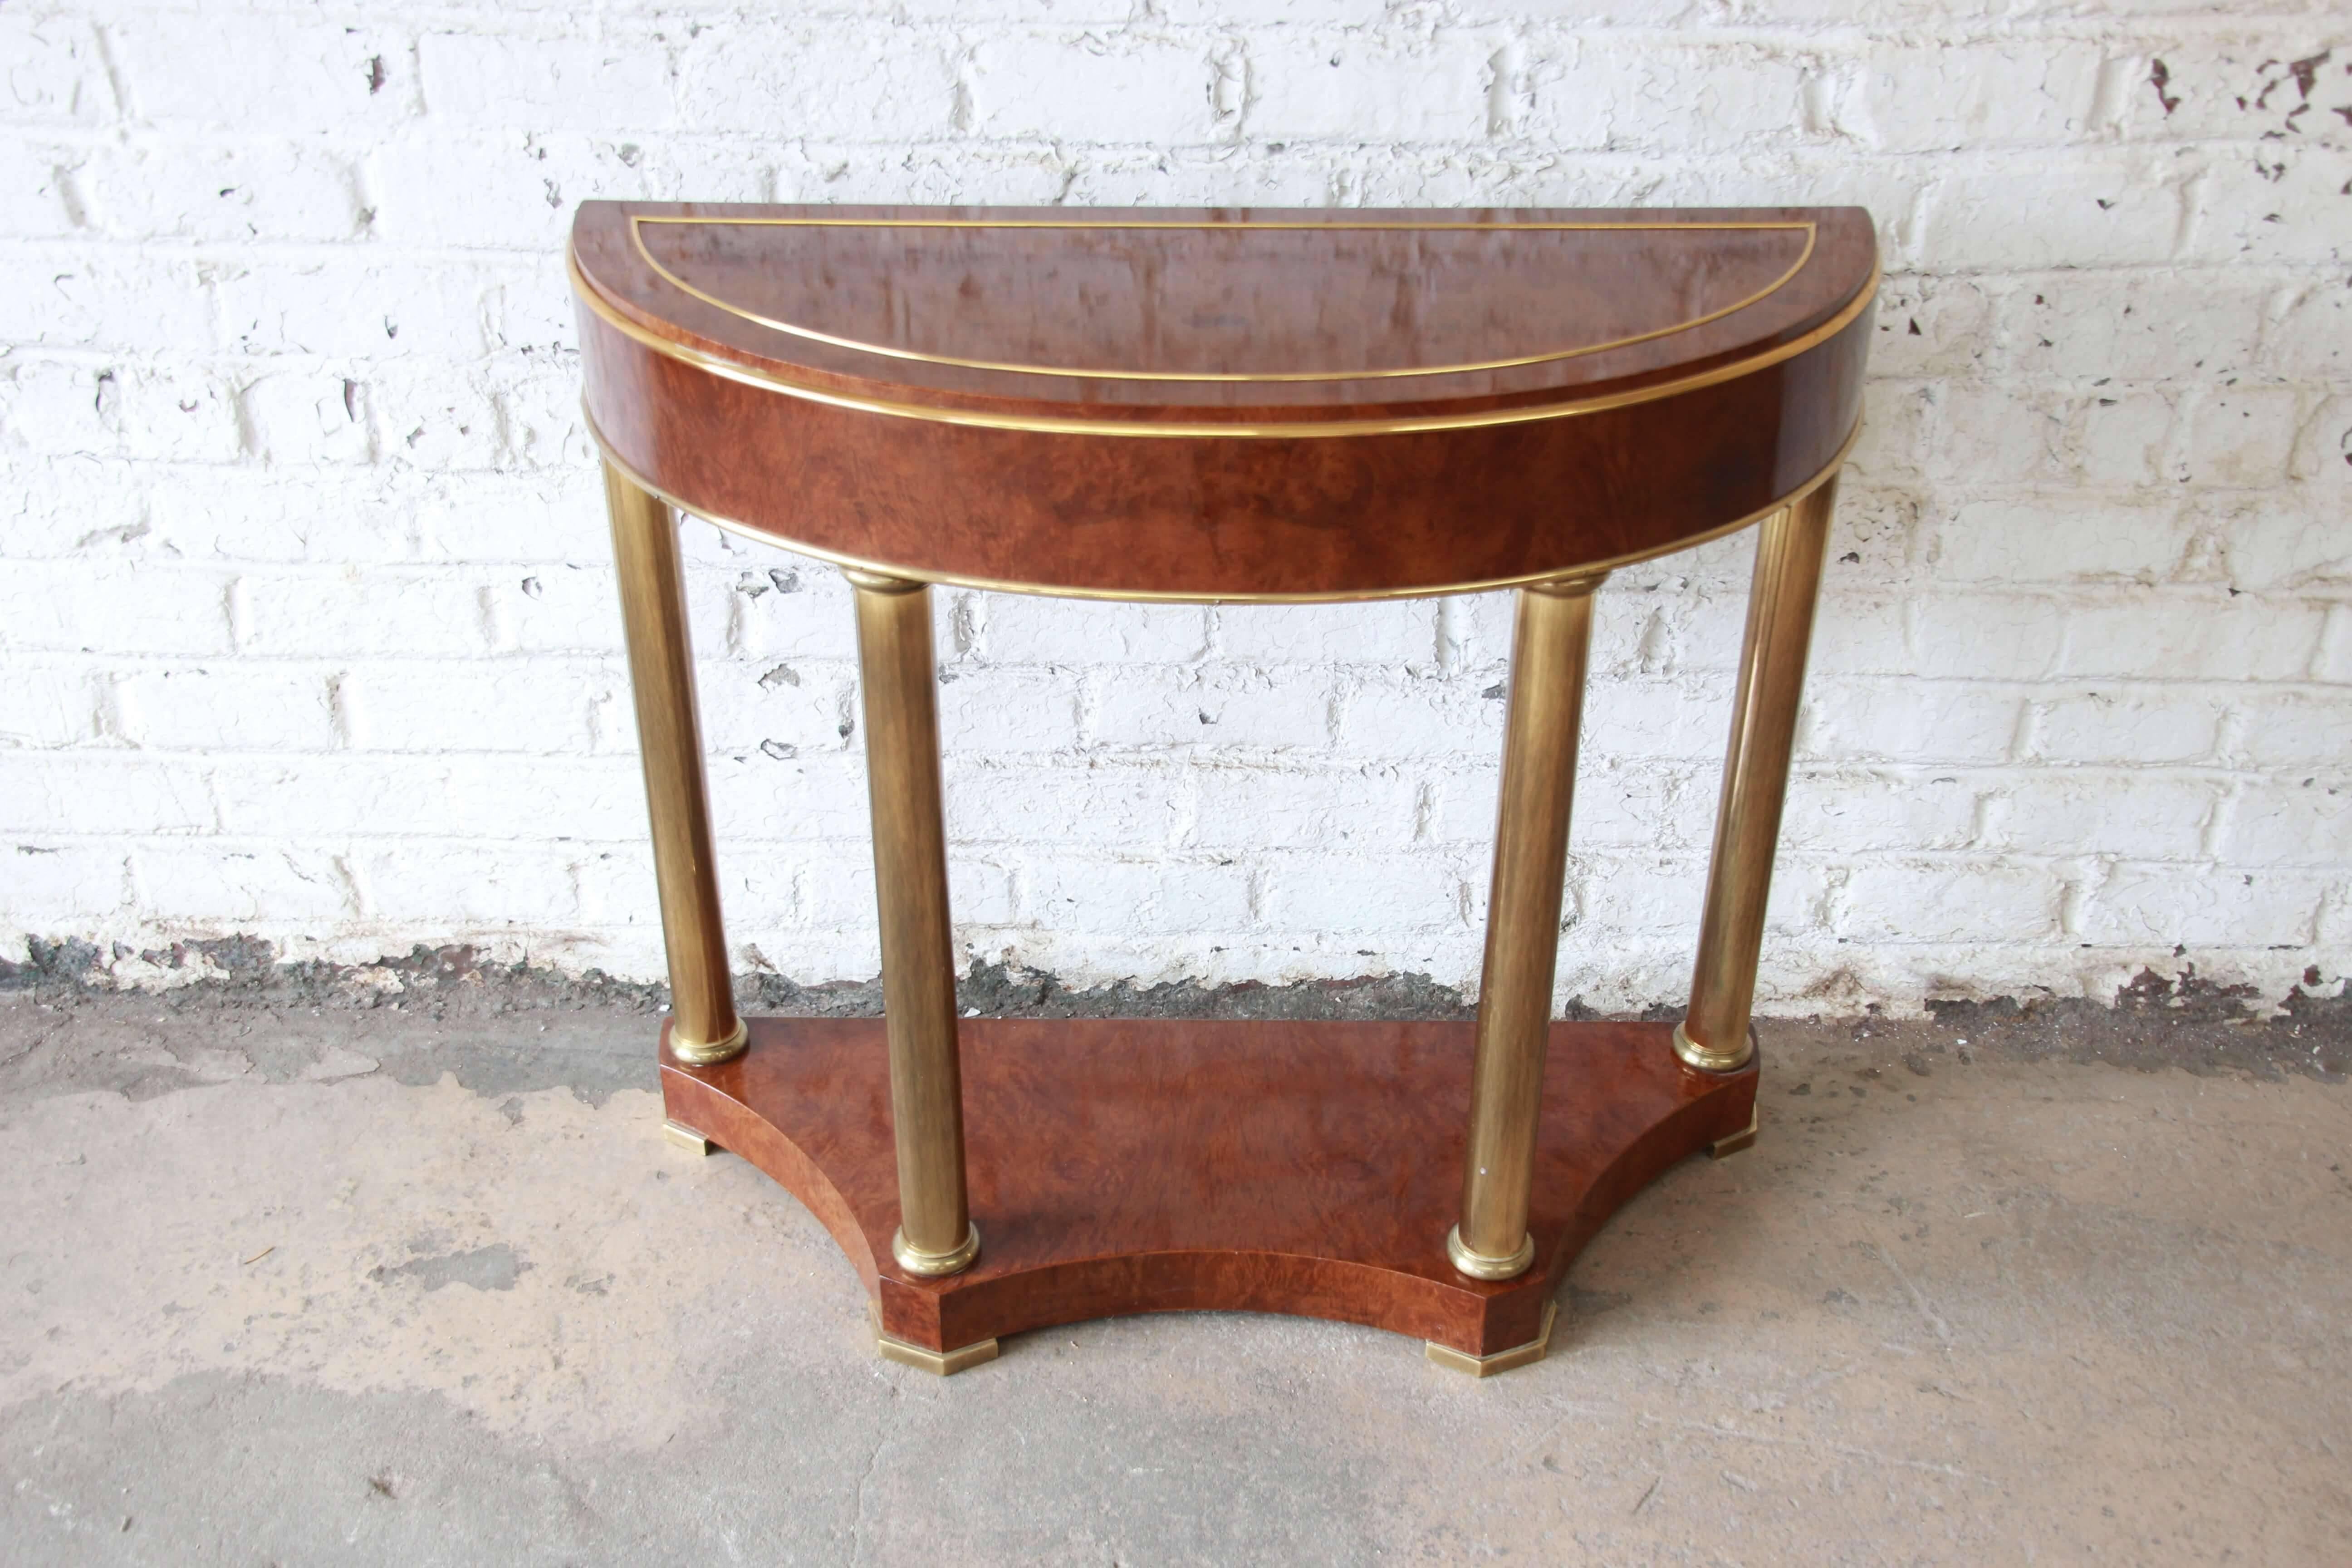 Offering a beautiful burl wood and brass demilune console table by Mastercraft. The table has brass columns and trim with a stunning burl wood finish. The feet of the demilune table are solid brass and the piece is in overall great vintage condition.